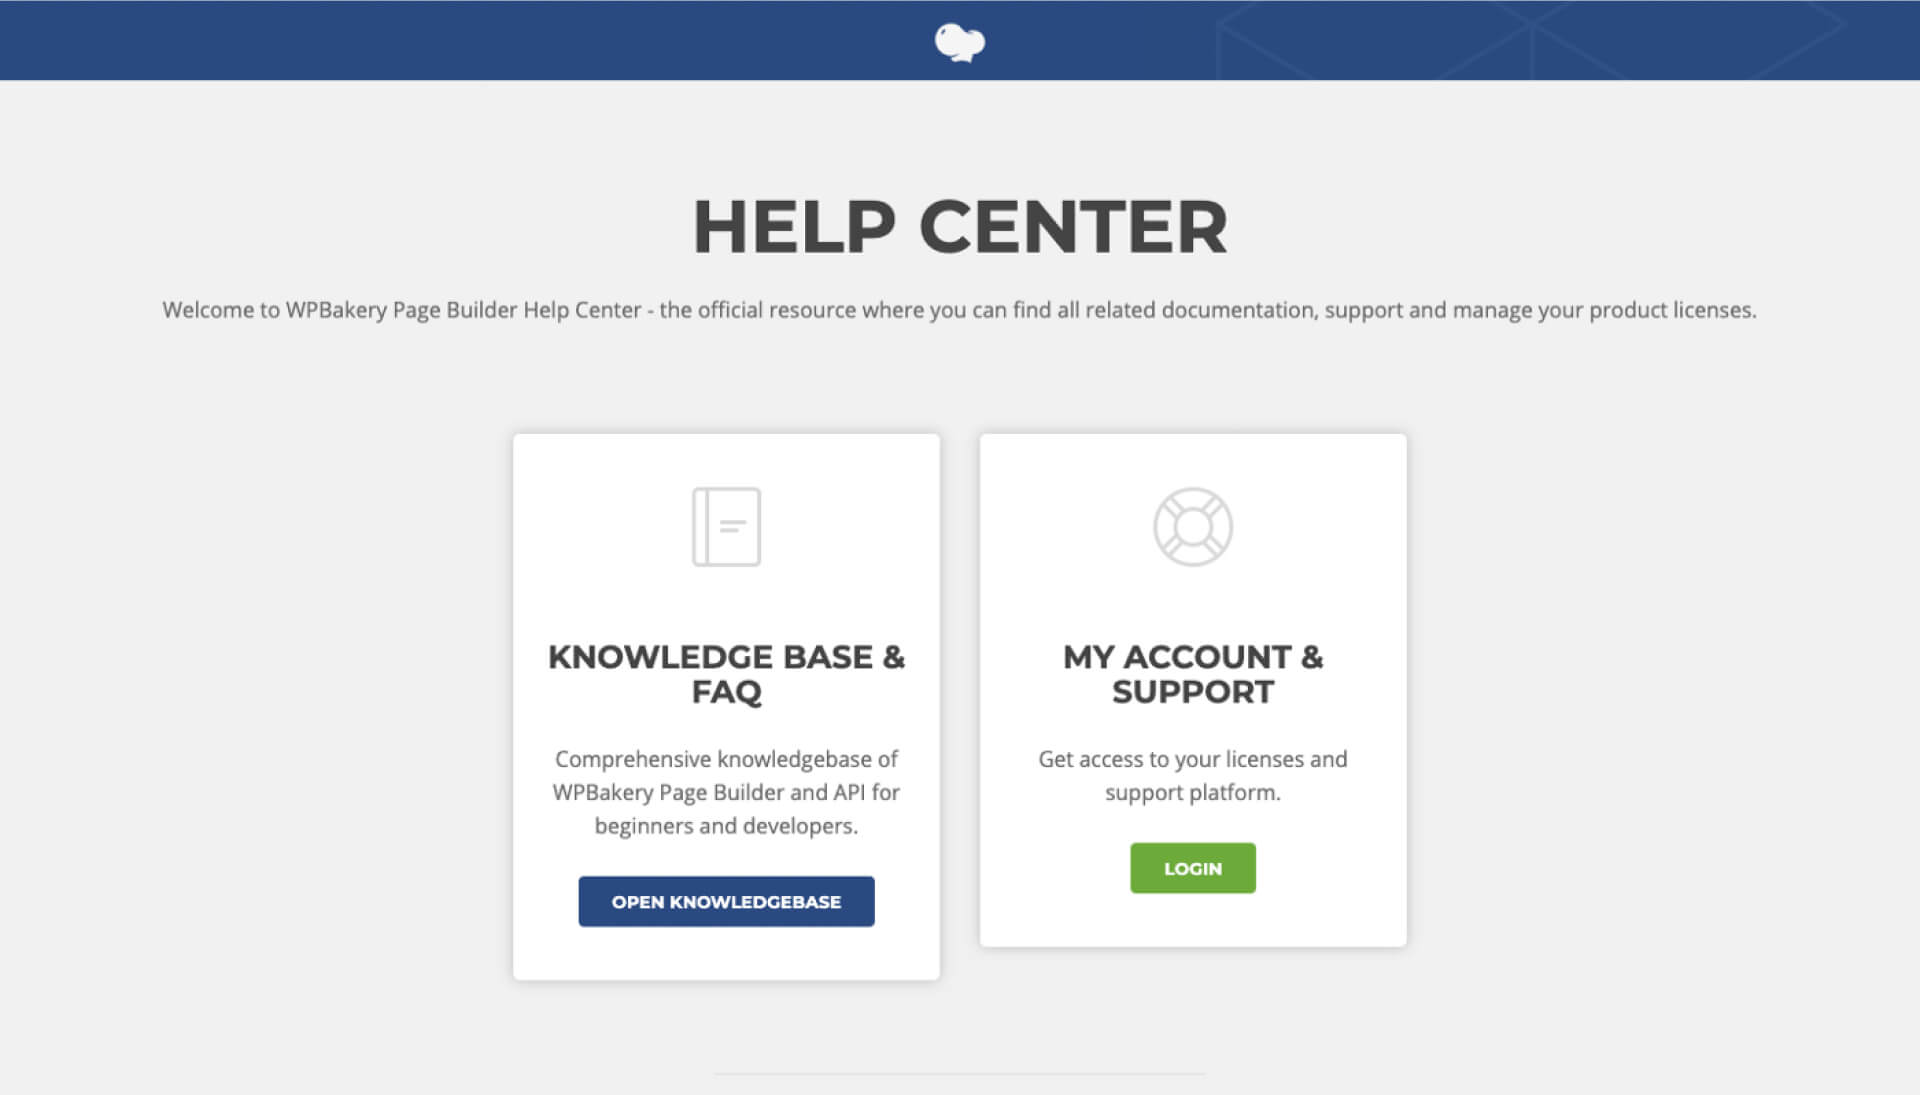 WPBakery Page Builder 官網的 Help Center 頁面